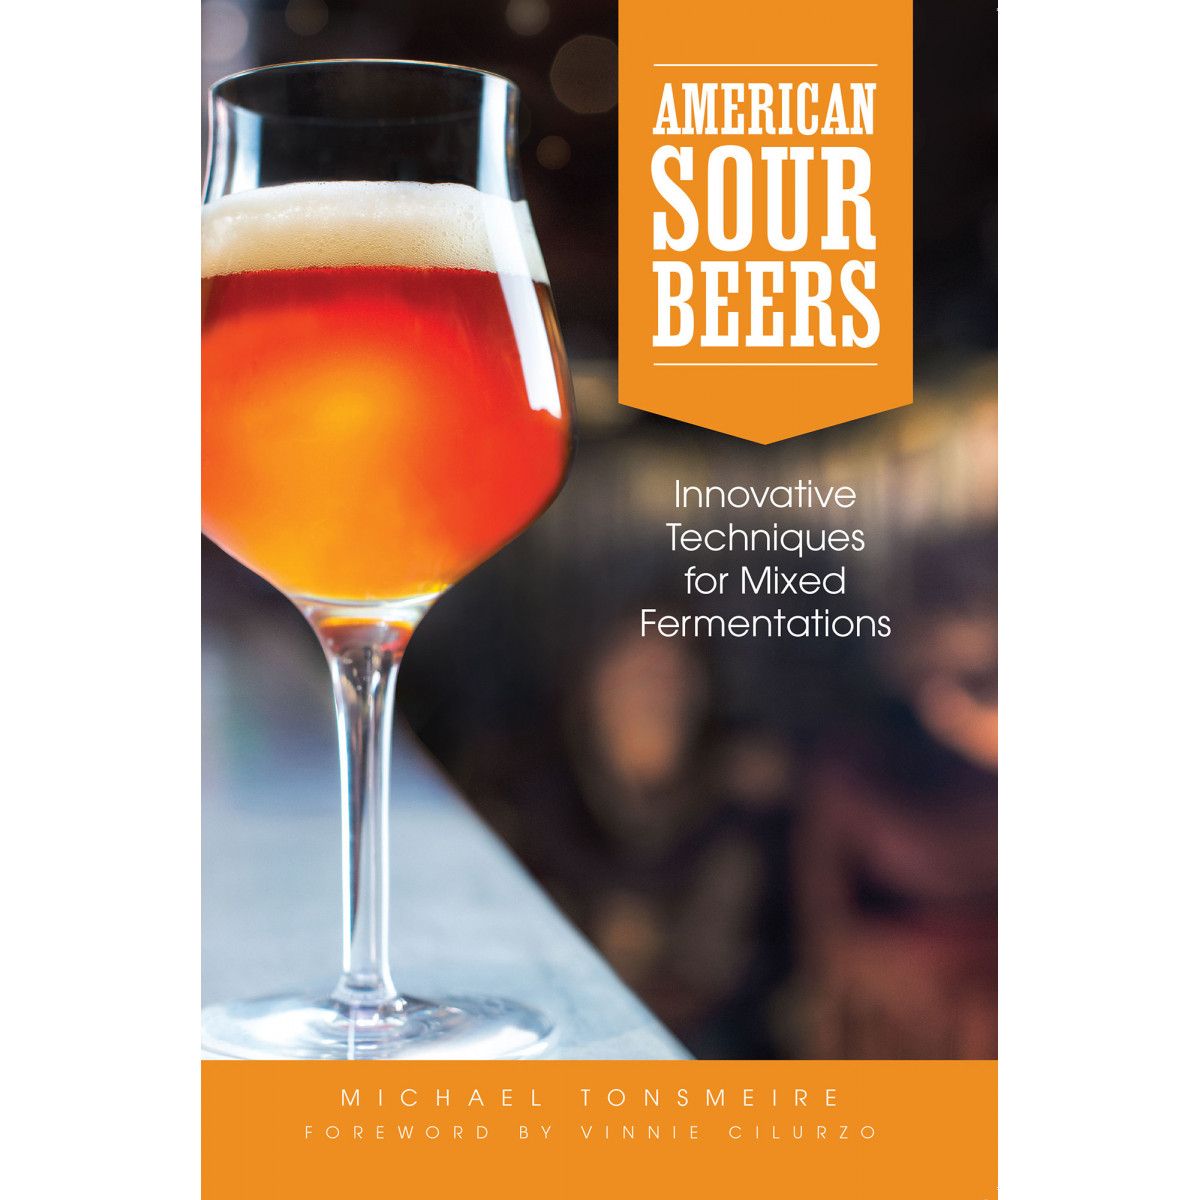 American Sour Beers: Innovative Techniques for Mixed Fermentations - Michael Tonsmeire